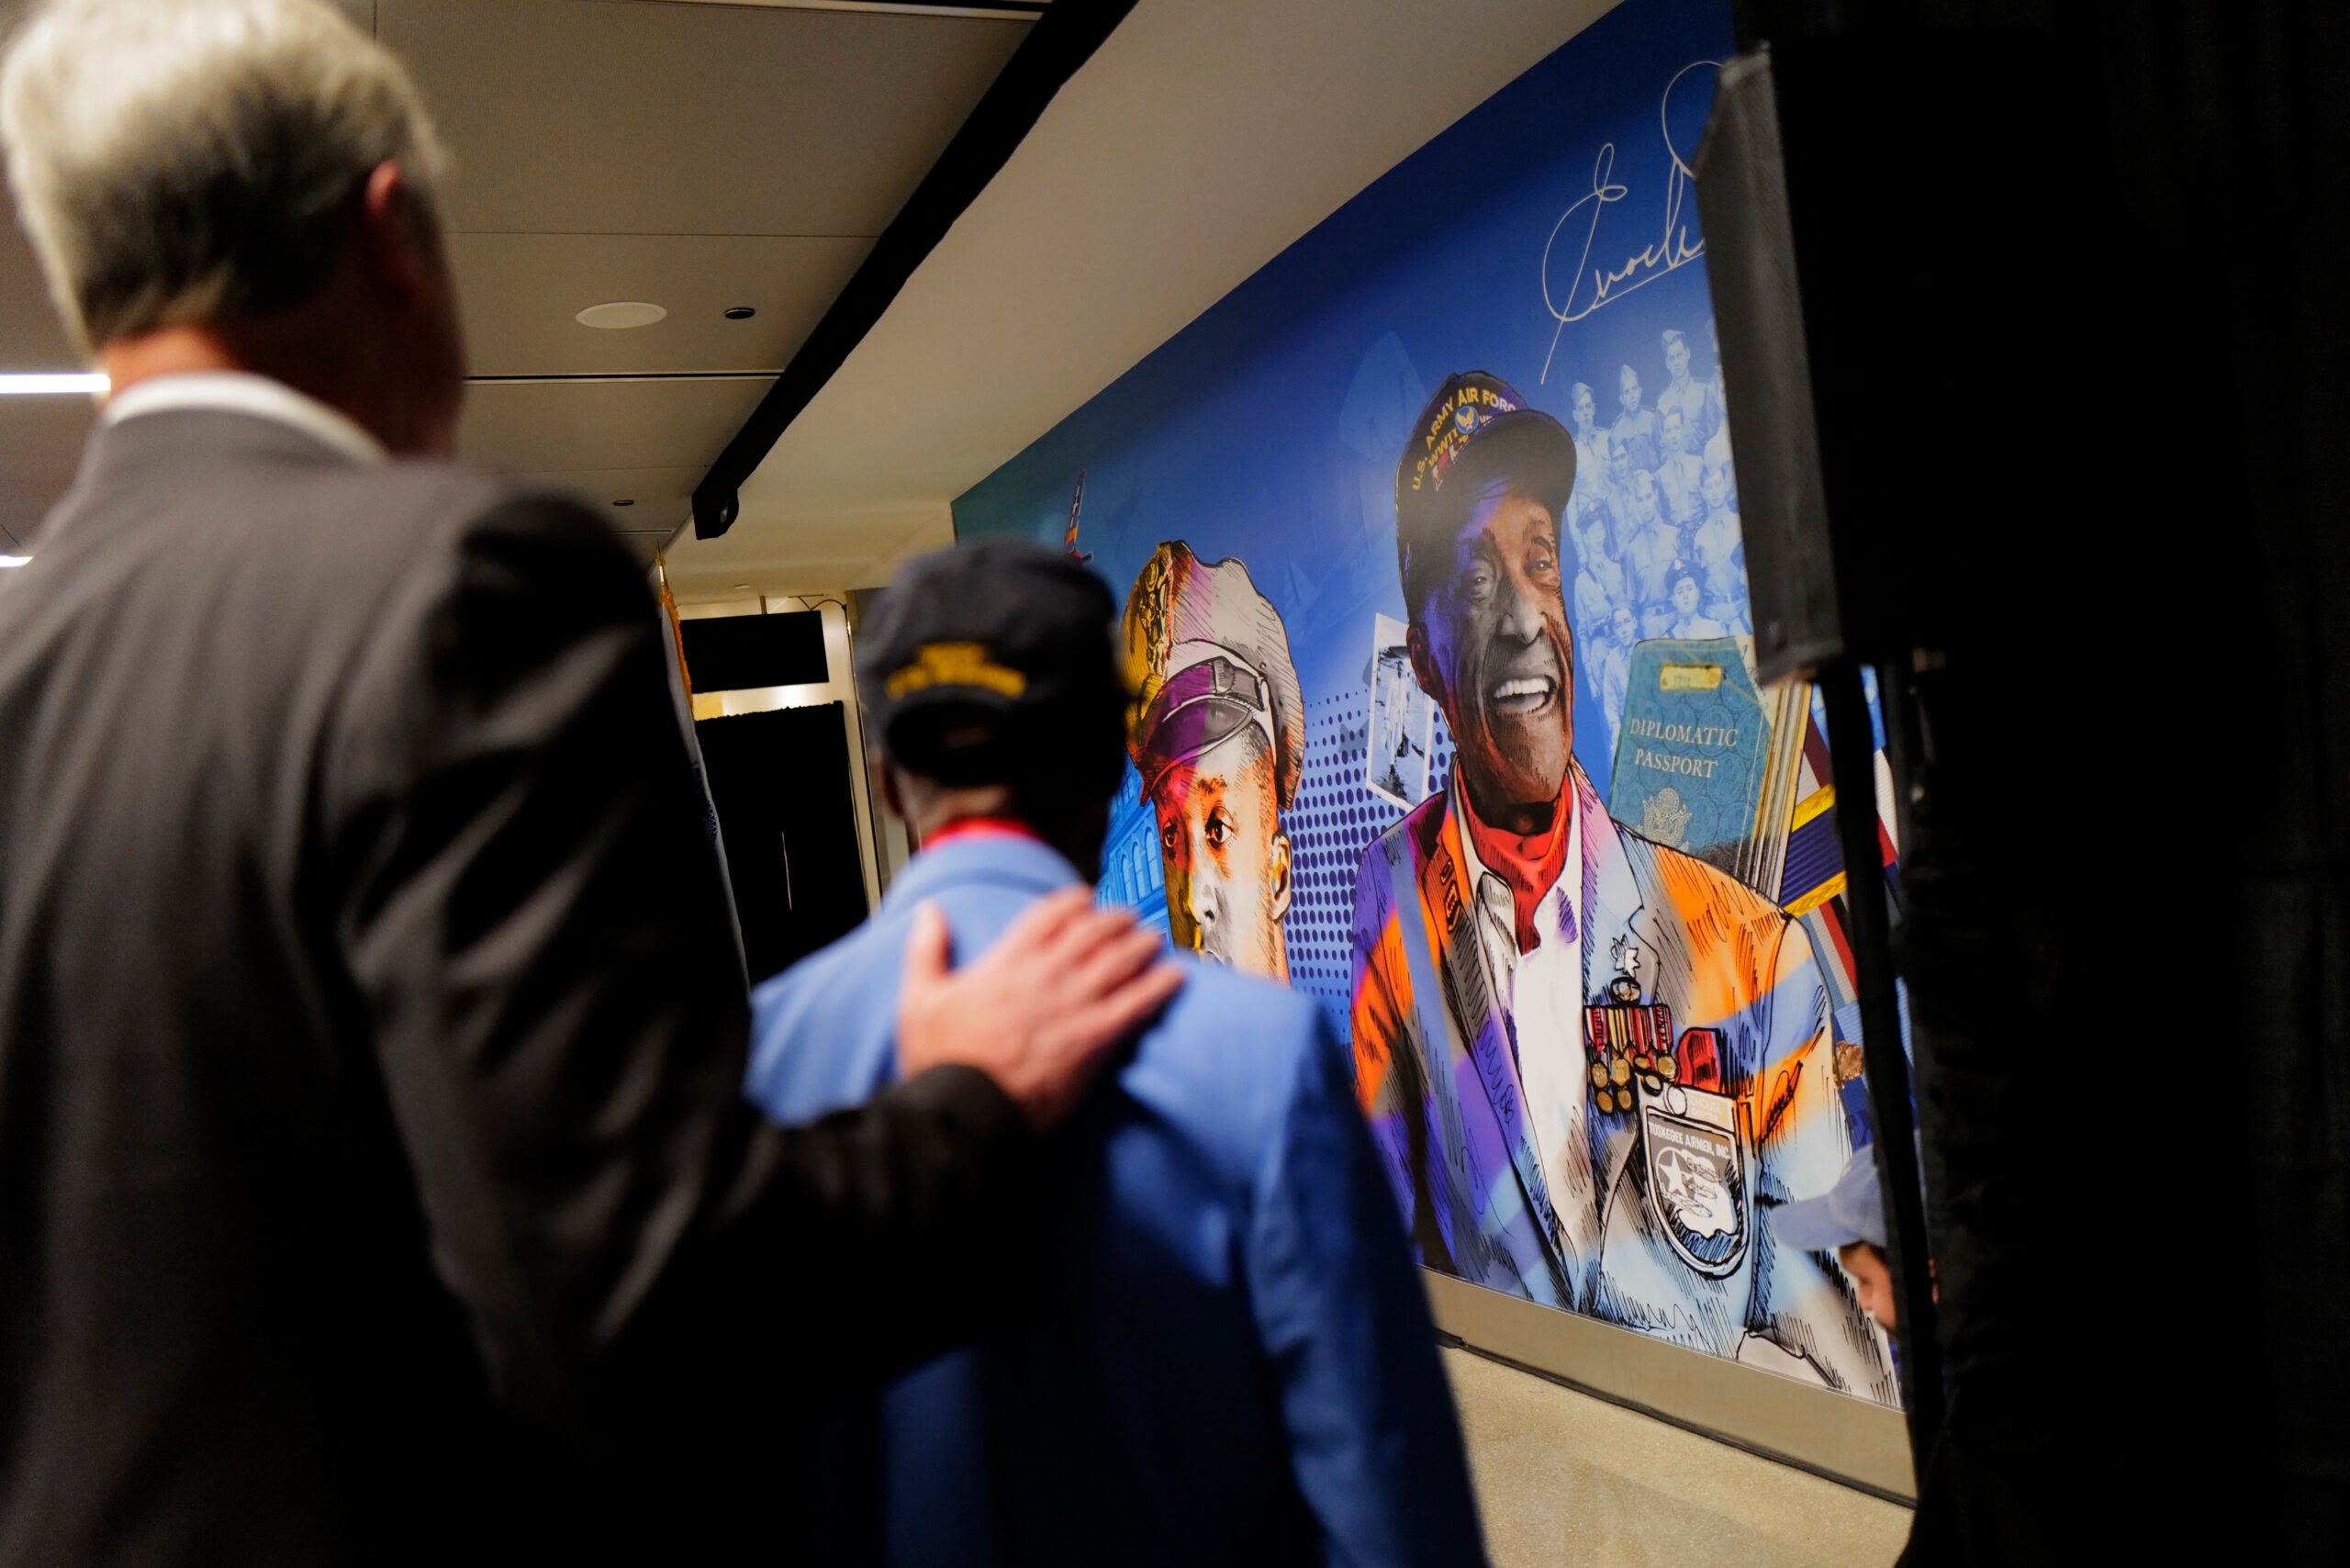 Tuskegee Airman Honored with Logan Airport Mural